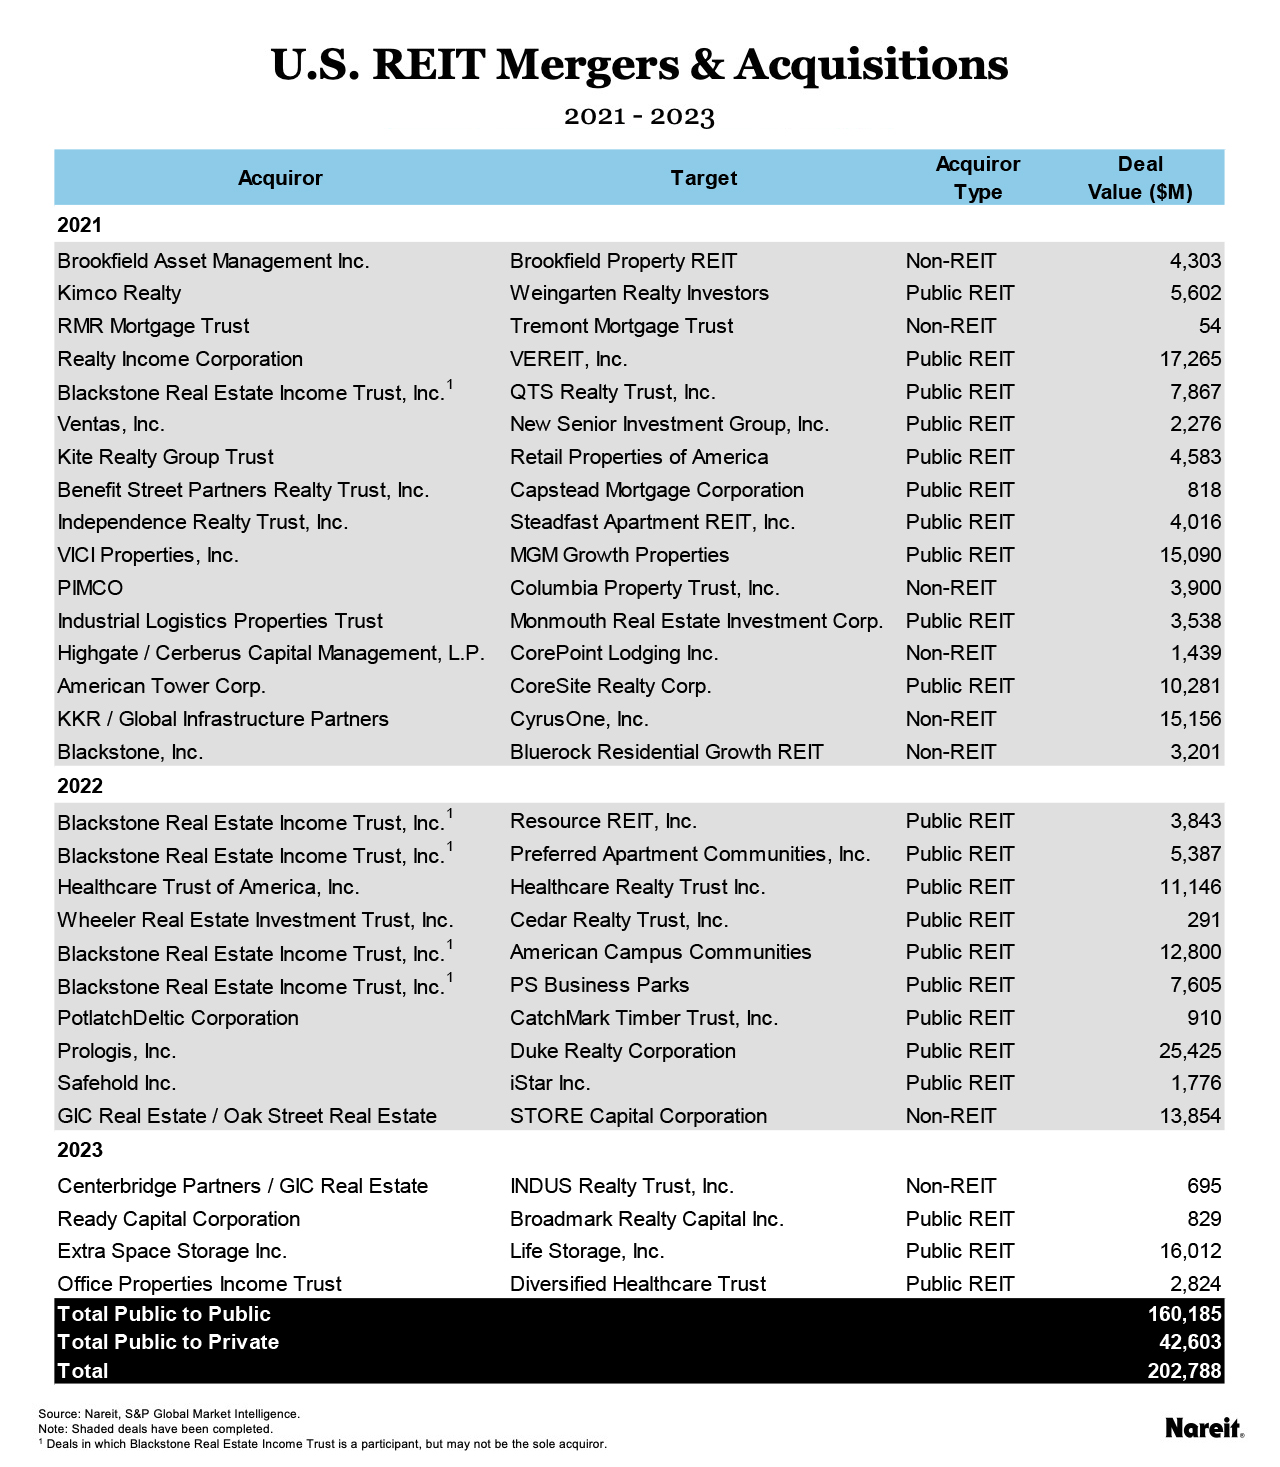 U.S REIT Mergers and Acquisitions